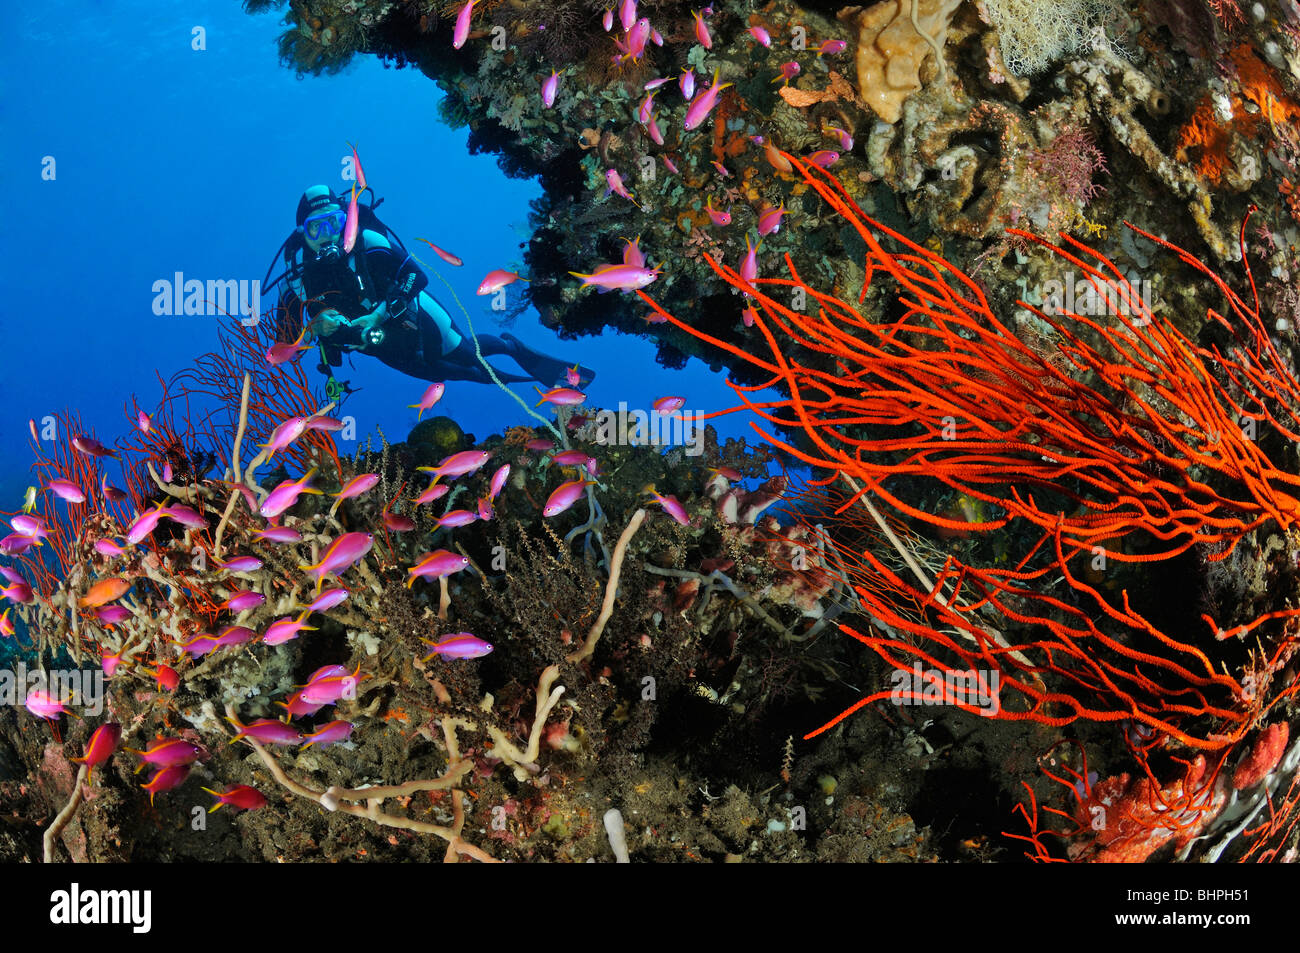 Pseudanthias tuka, Ellisella ceratophyta, scuba diver with colorful coral reef and Purple queen and soft corals, Bali Stock Photo